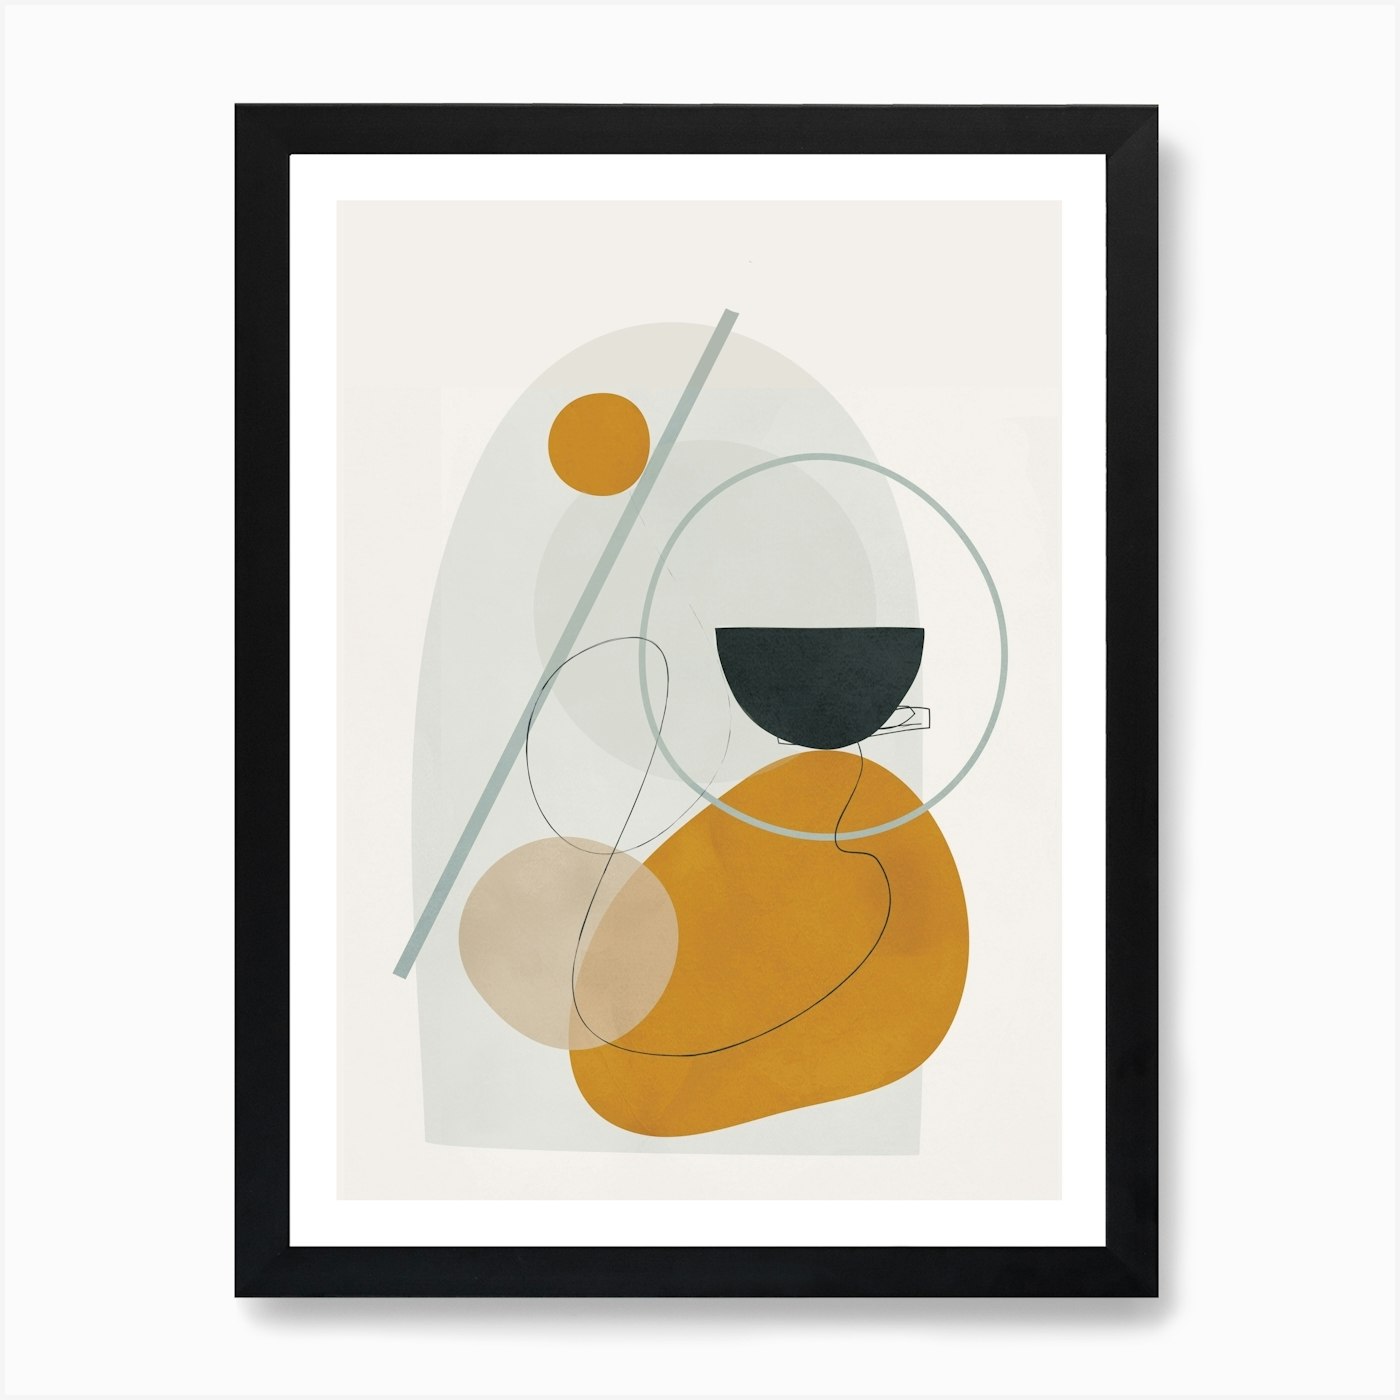 Abstract Shapes No 4 - Print Art City Fy by Art